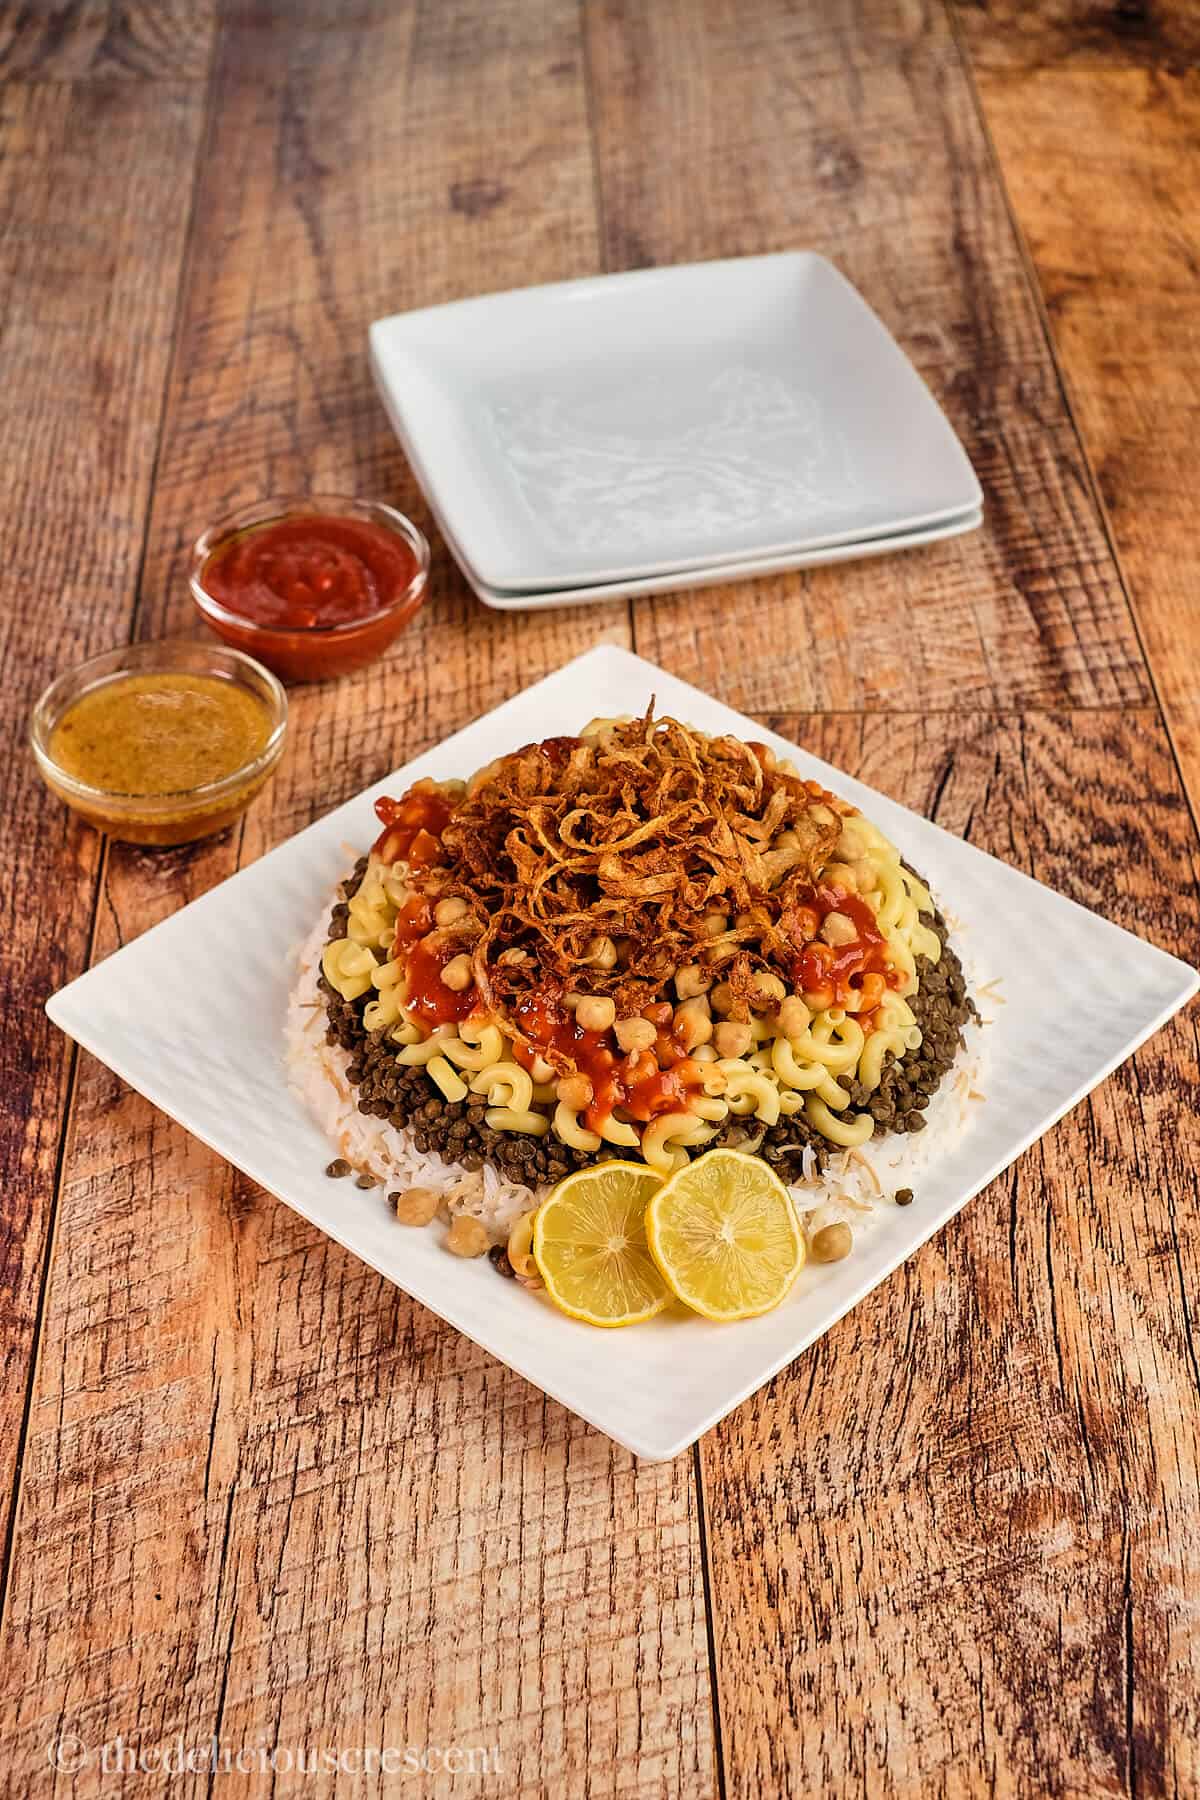 The popular Egyptian national dish served in a plate with delicious sauces.